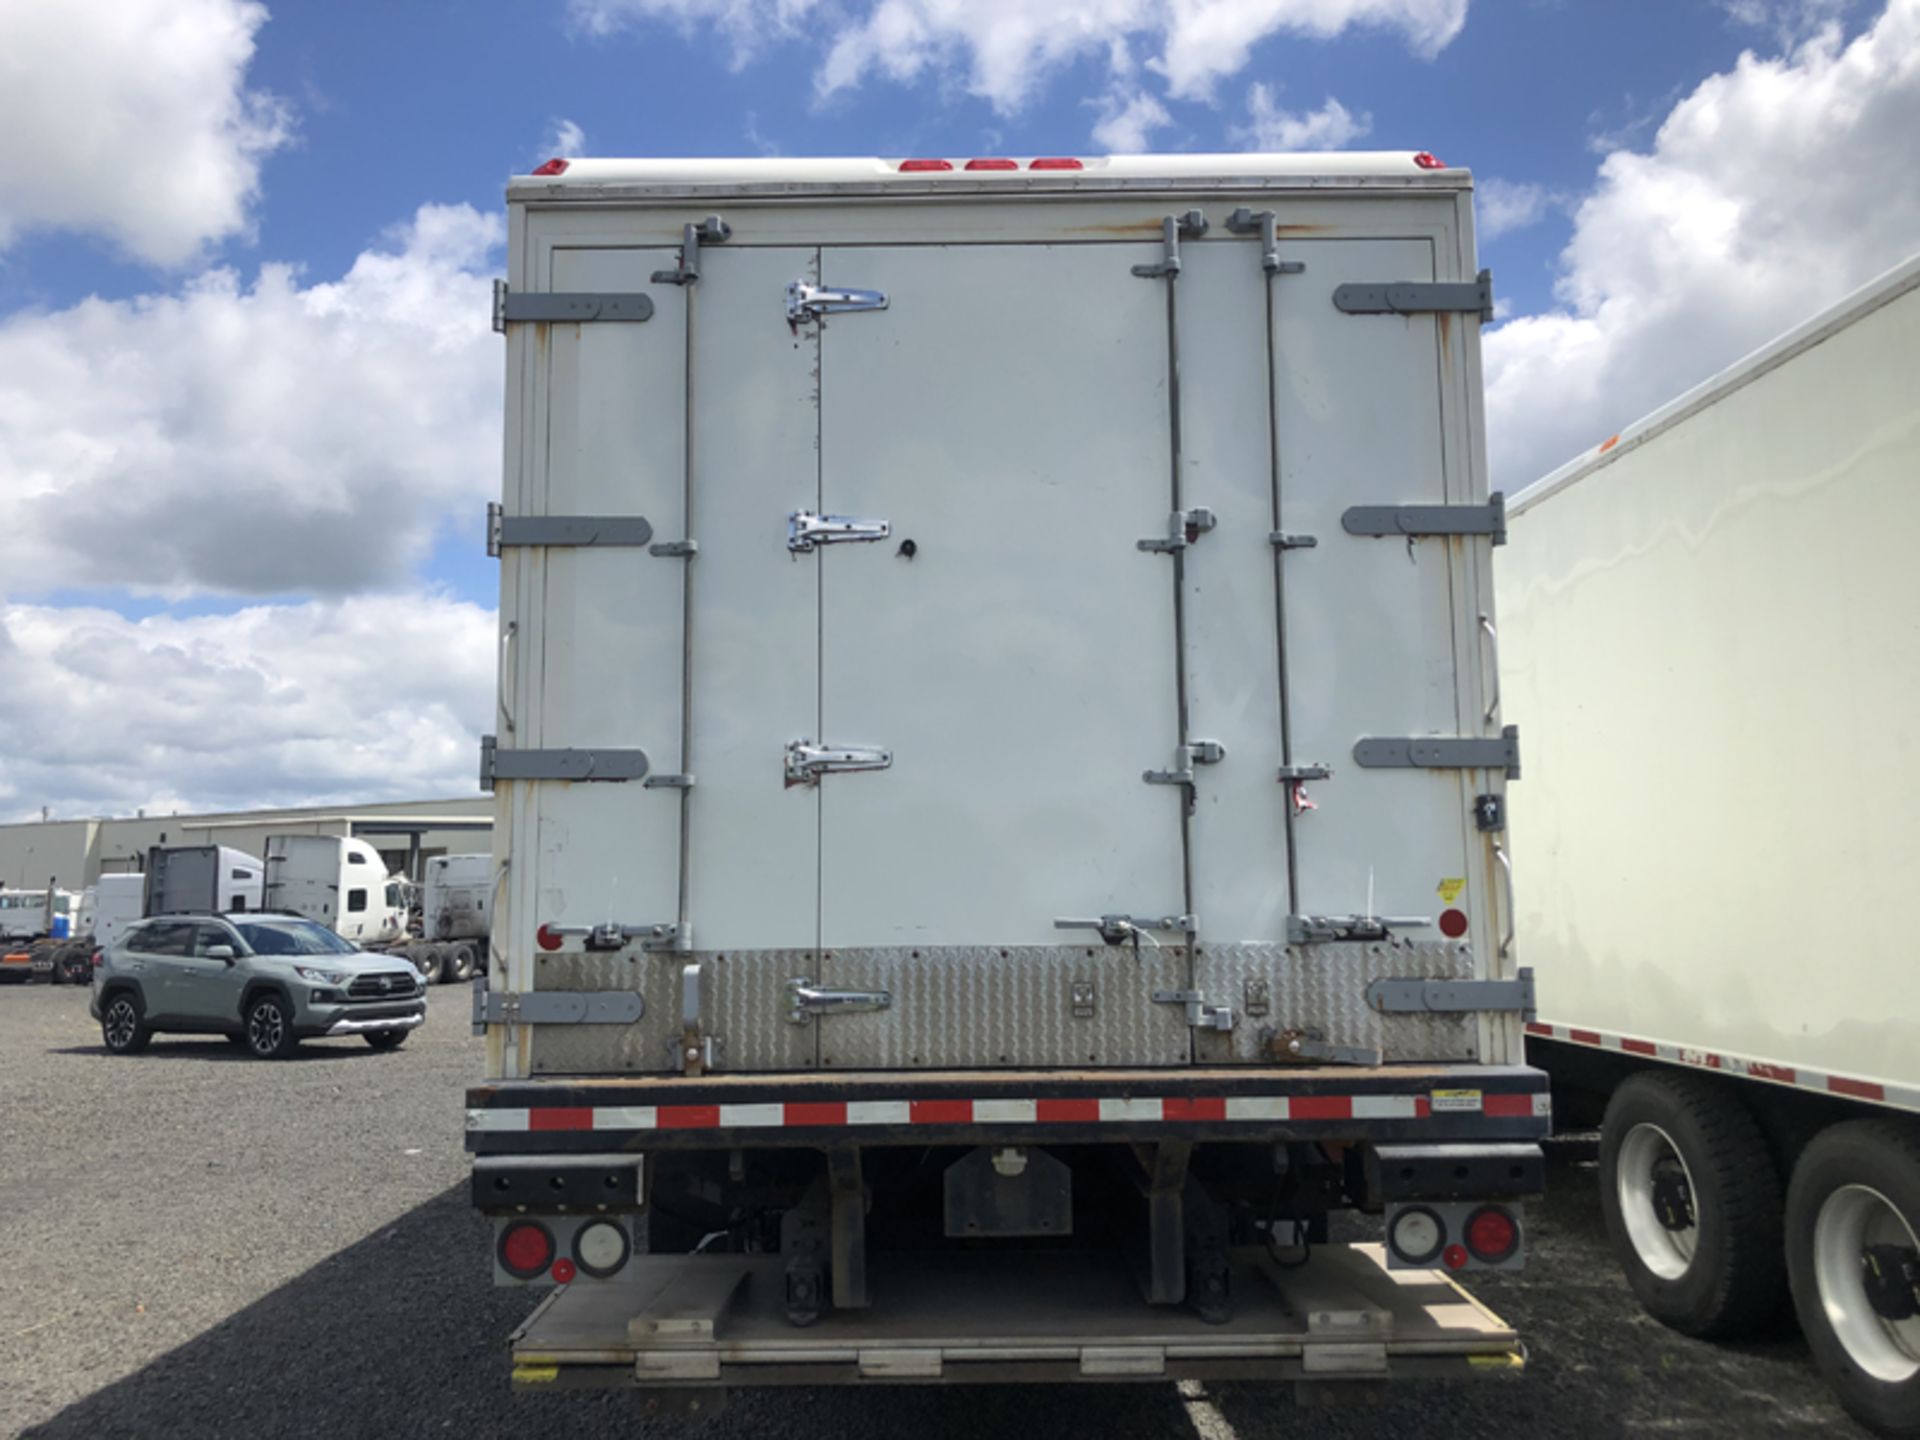 2018 INTERNATIONAL 4400 SBA 6X4 REFRIGERATED BOX TRUCK VIN#: 1HTMSTARXJH048976, Approx Miles: 17735, - Image 5 of 15